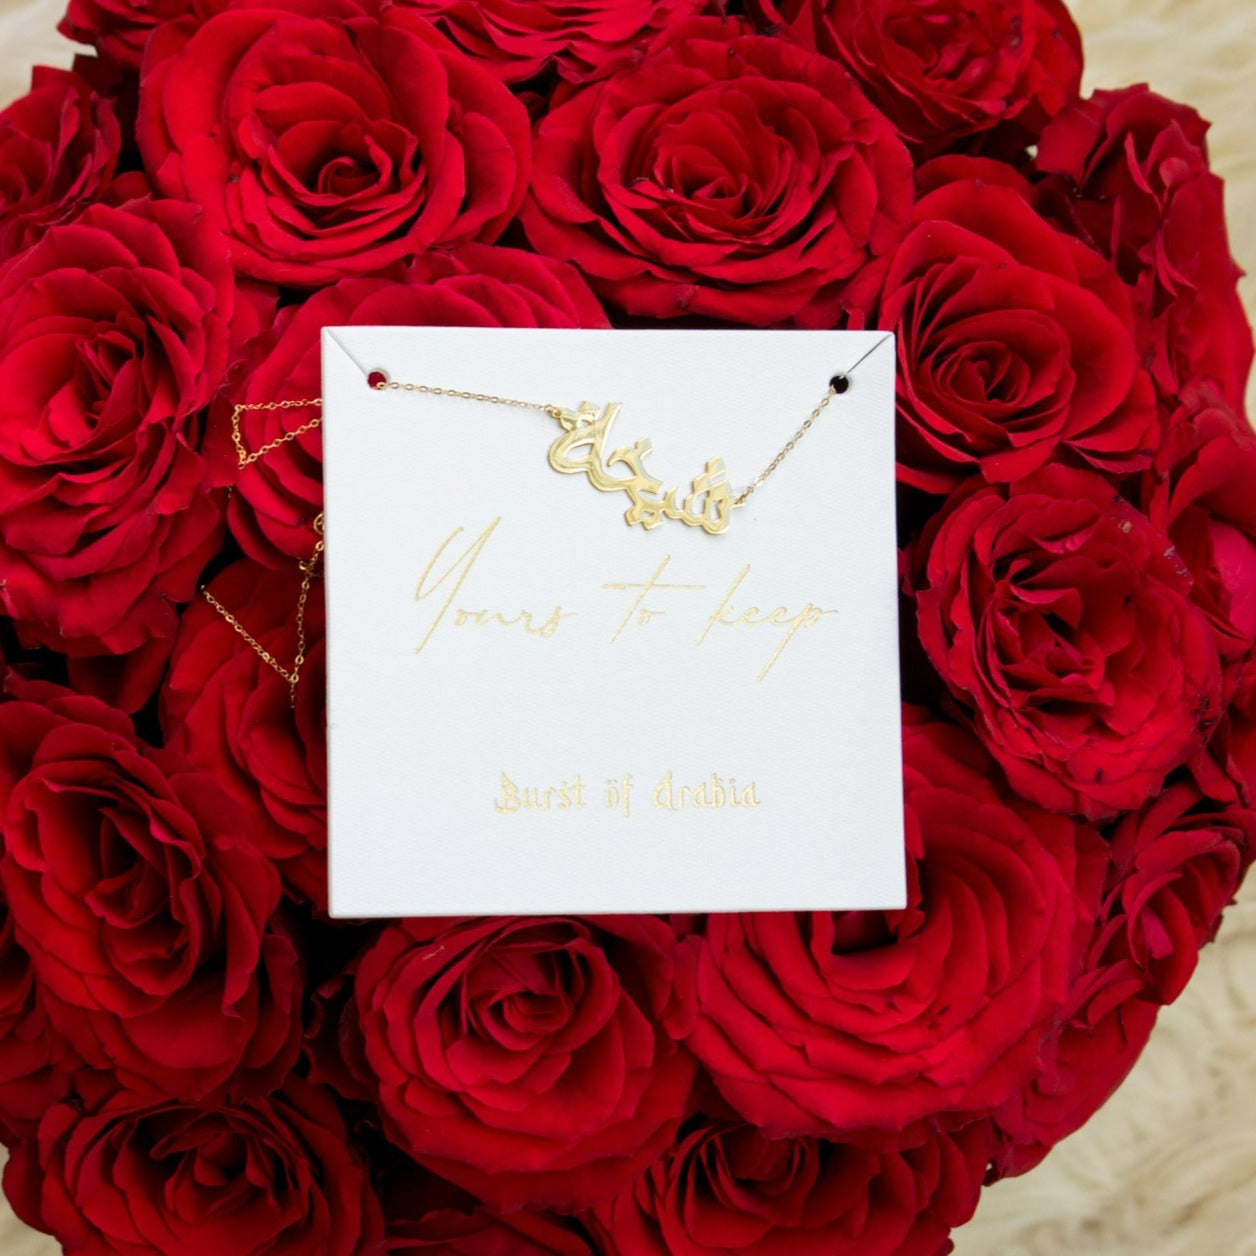 This gorgeous modern gold name necklace is handcrafted in real genuine gold by our skilled jewelers in Dubai. A truly lovely gift. Your loved one's name in gold, creating a uniquely, personal gift. Perfect addition to your jewelry collection or a gift to remember. Designed in the United Arab Emirates.